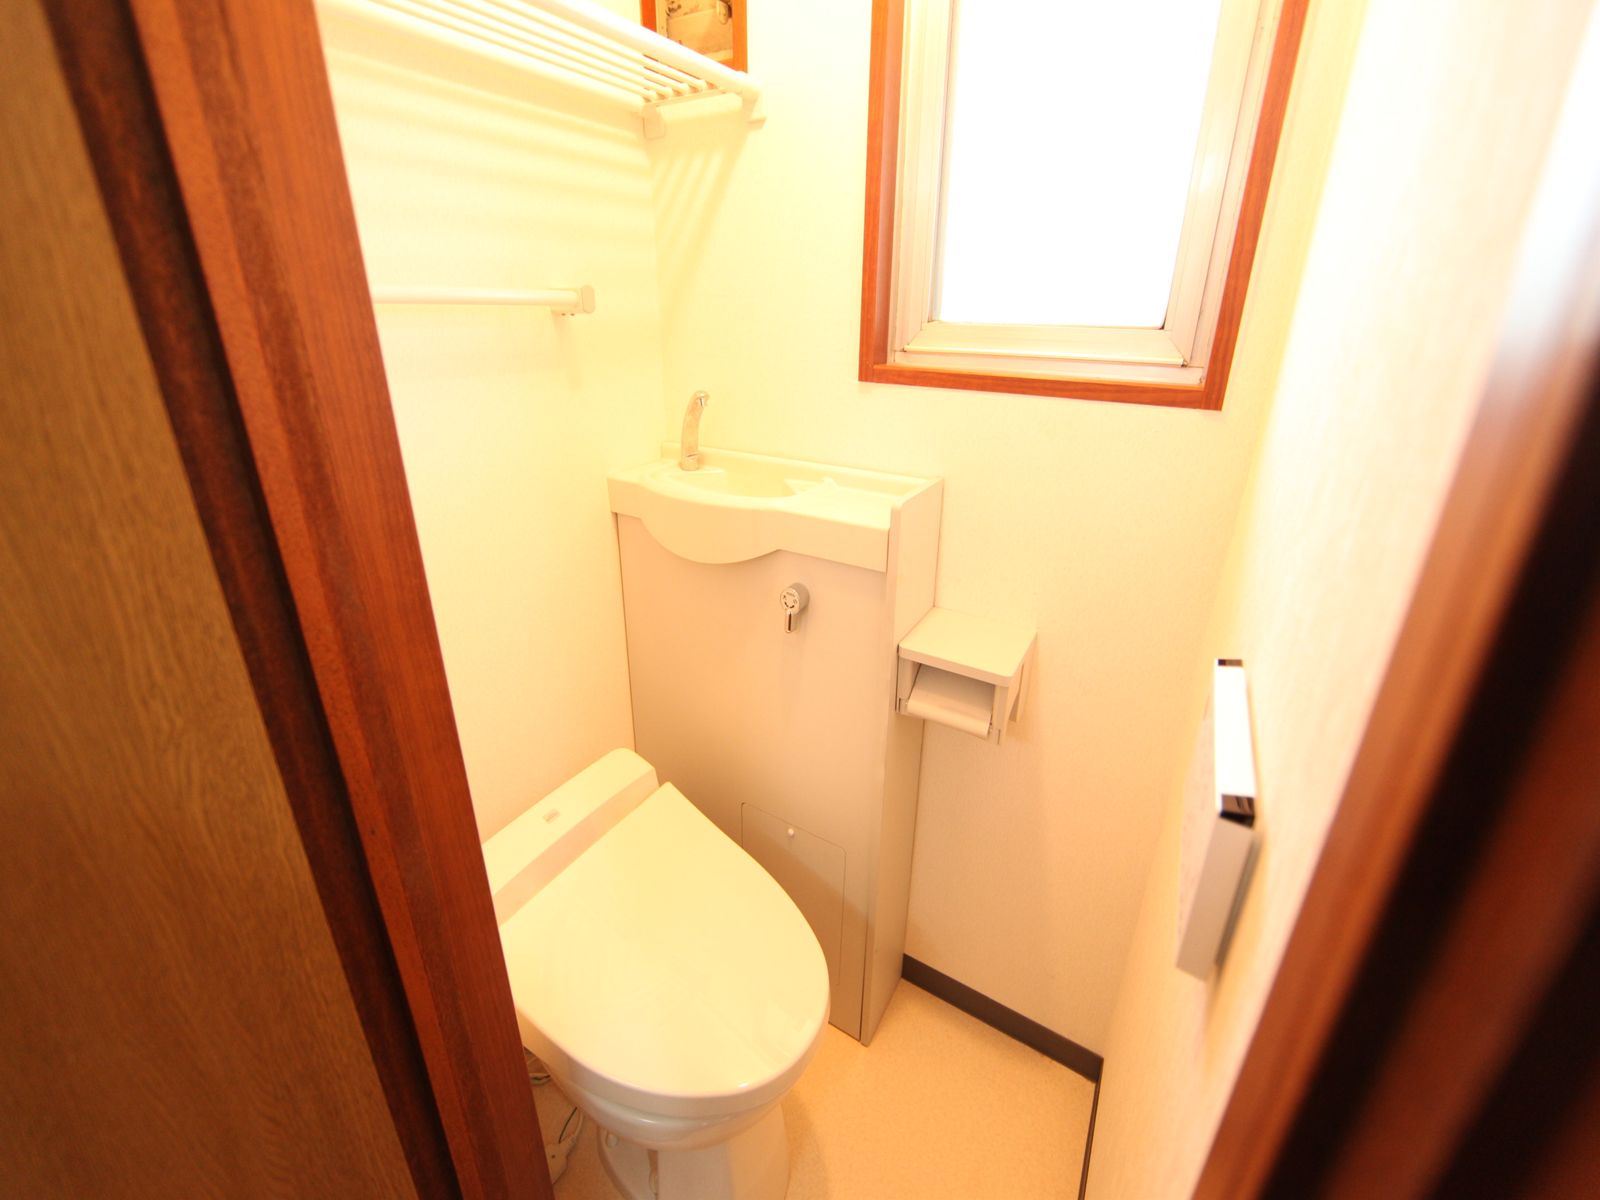 Toilet. Hot water battlefield heating toilet seat With hand-washing facilities With window